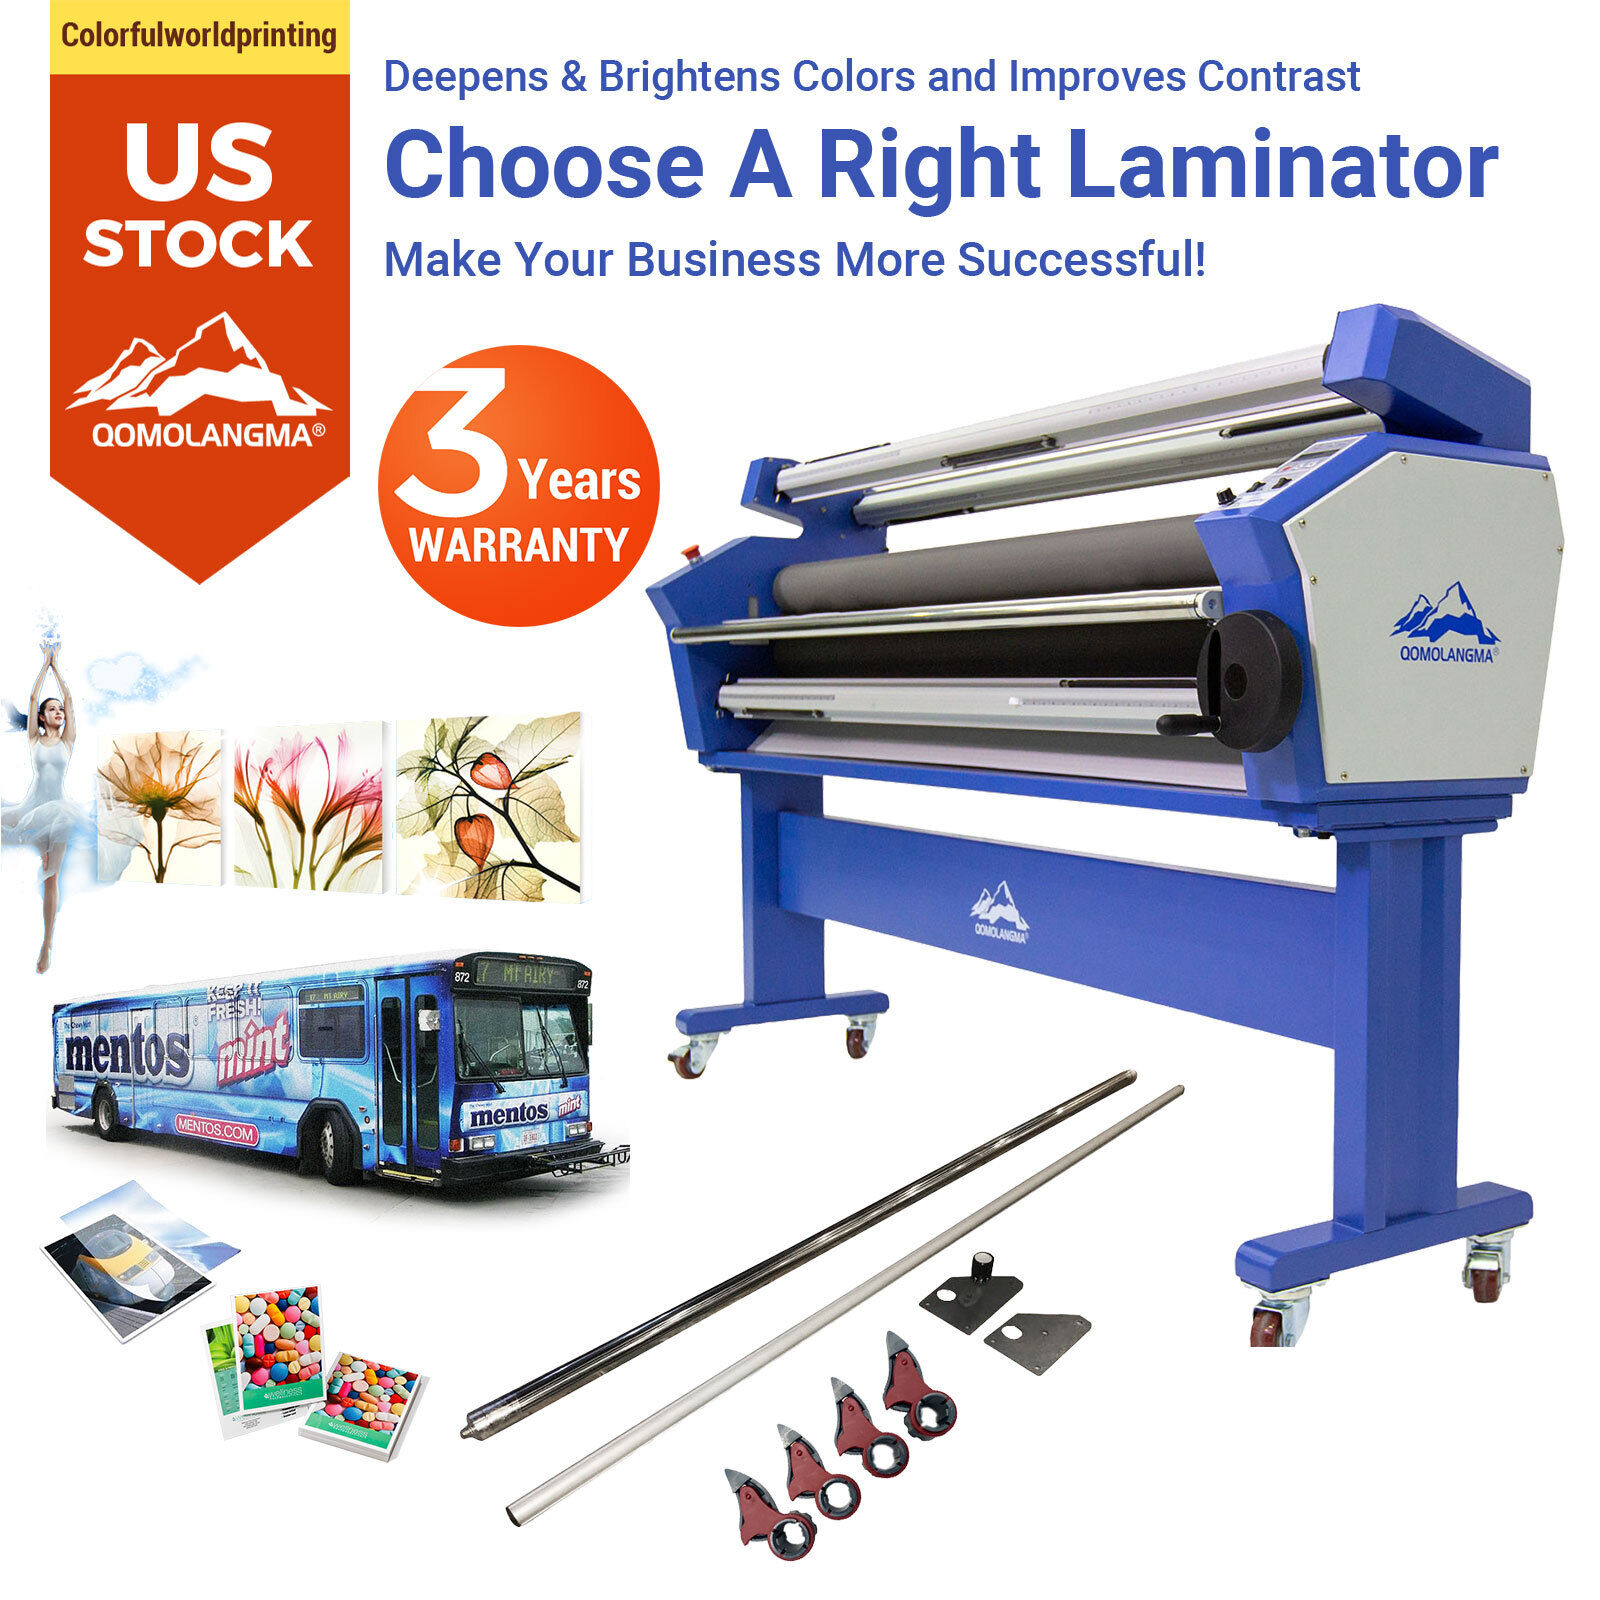 Qomolangma 55in/63in Full-auto Wide Format Cold Laminator with Trimmer Cutting